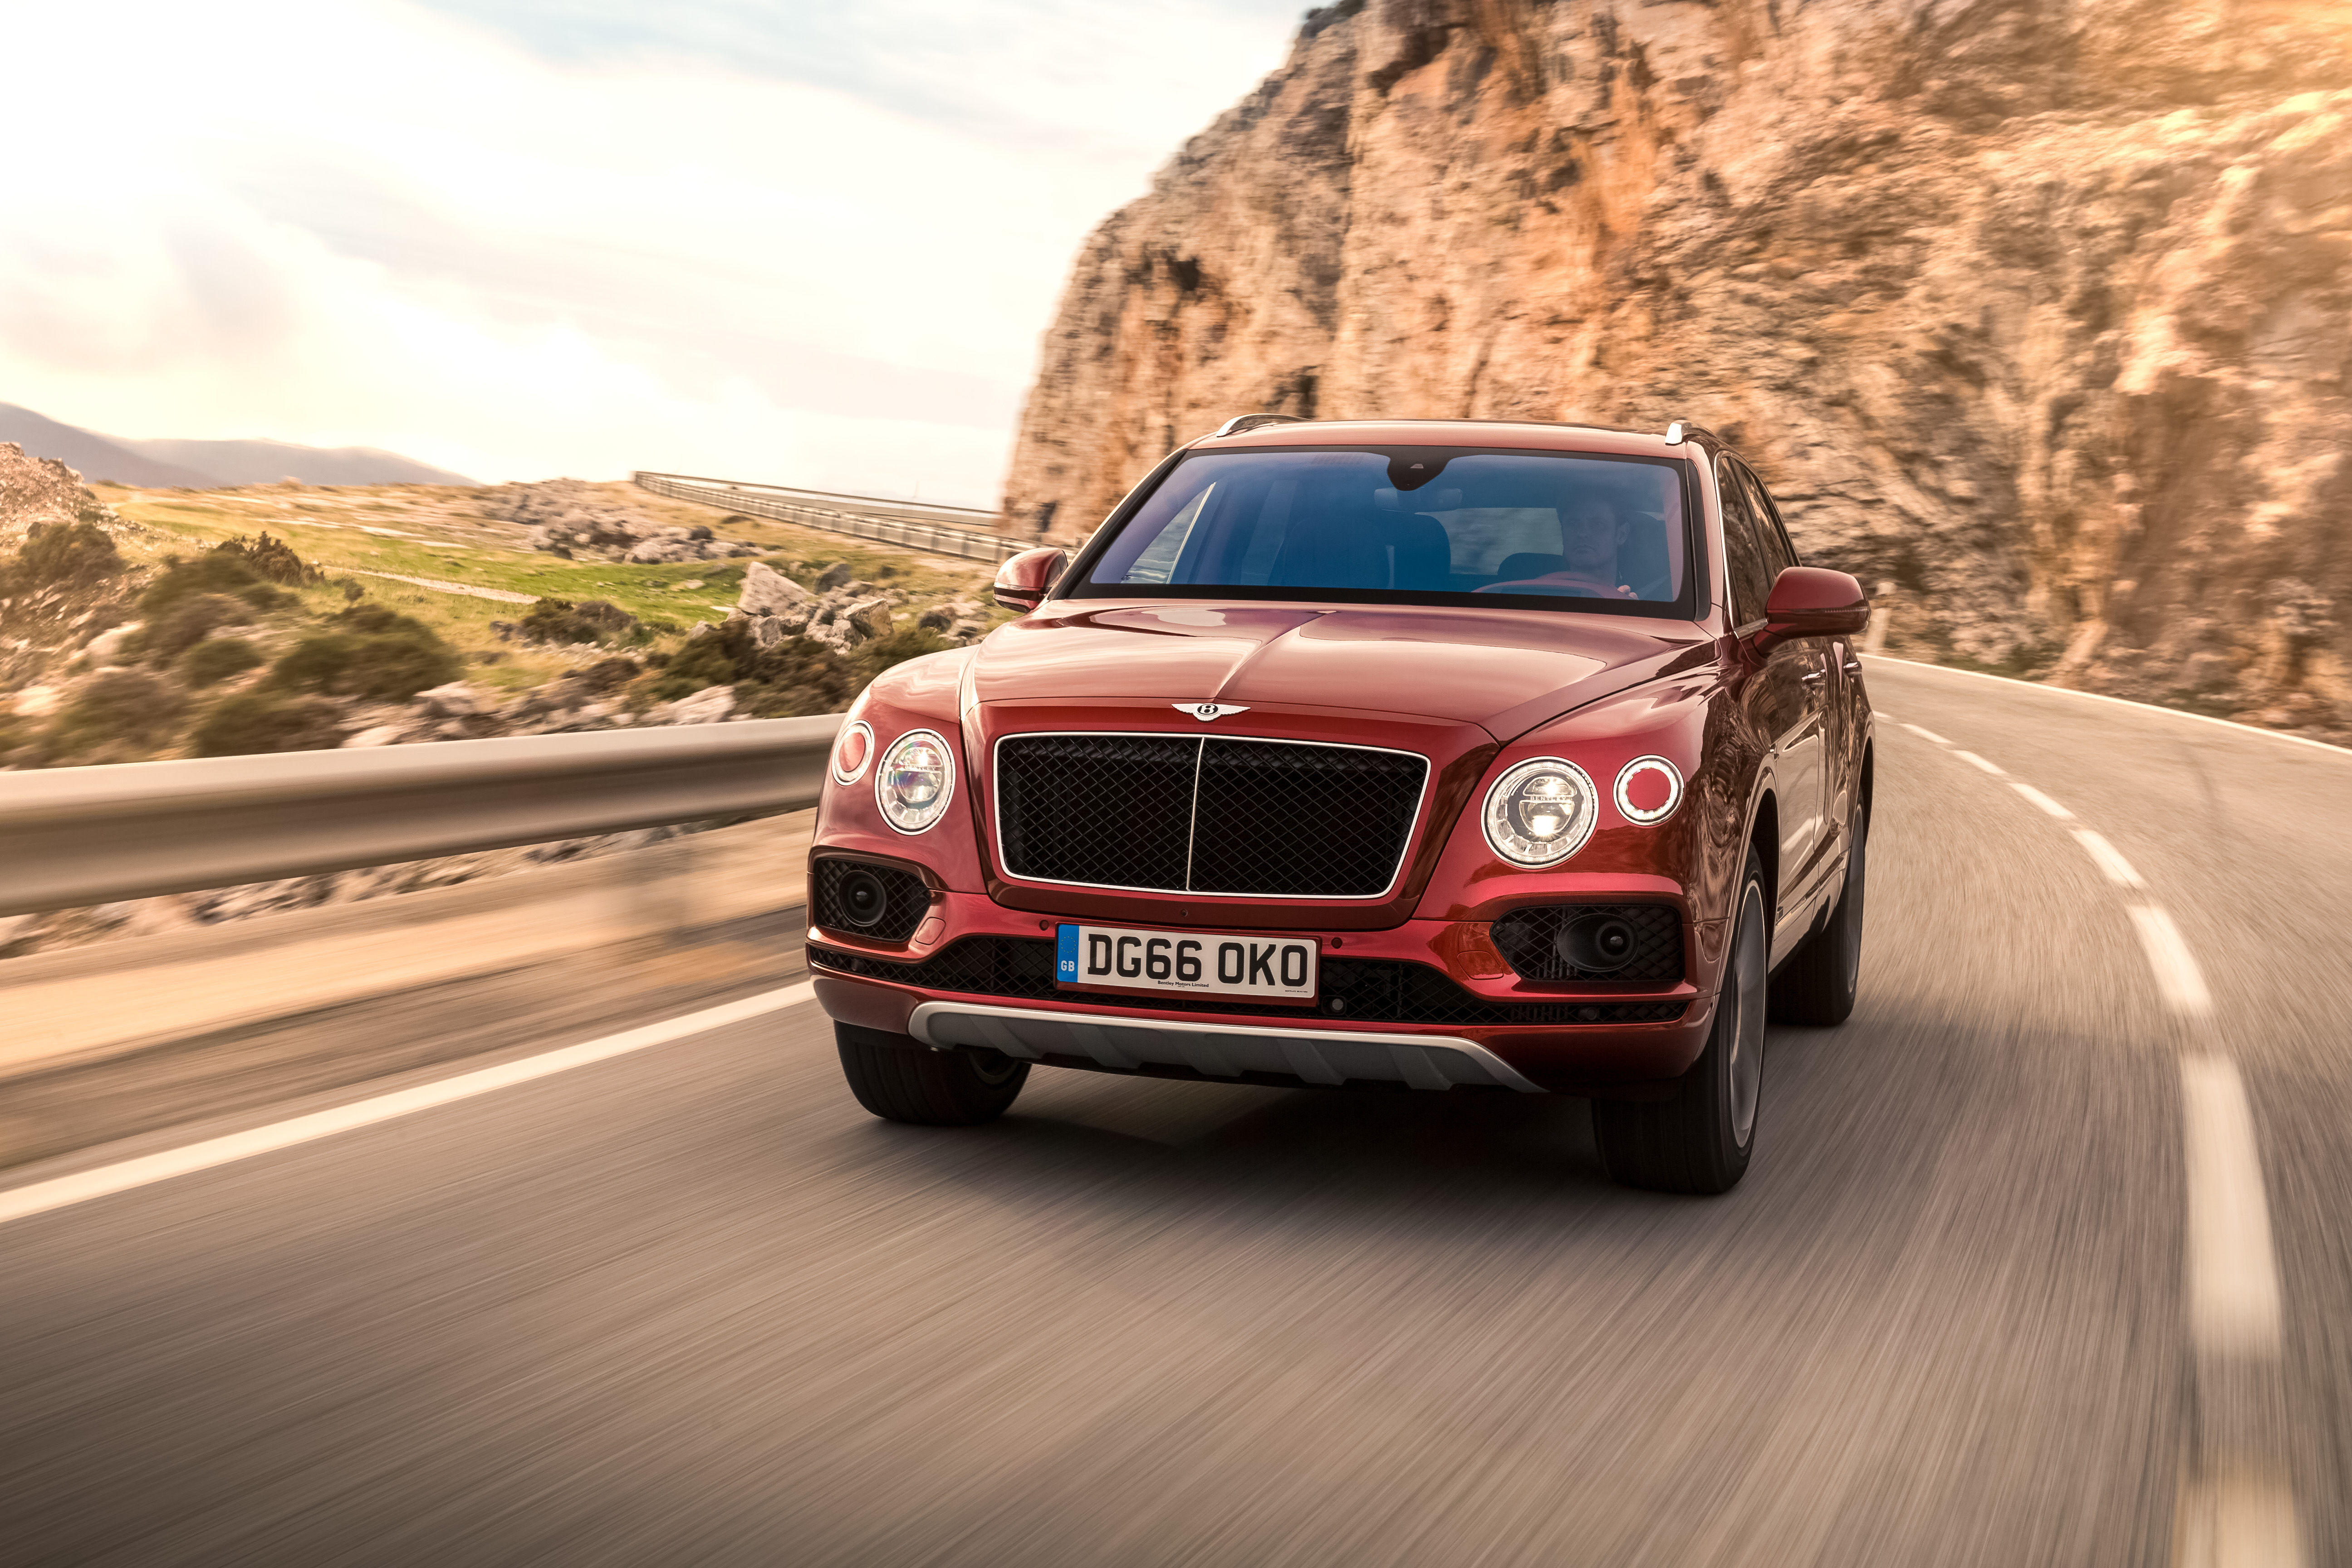 Bentley presents the world’s fastest diesel SUV with the V8 Bentayga Diesel